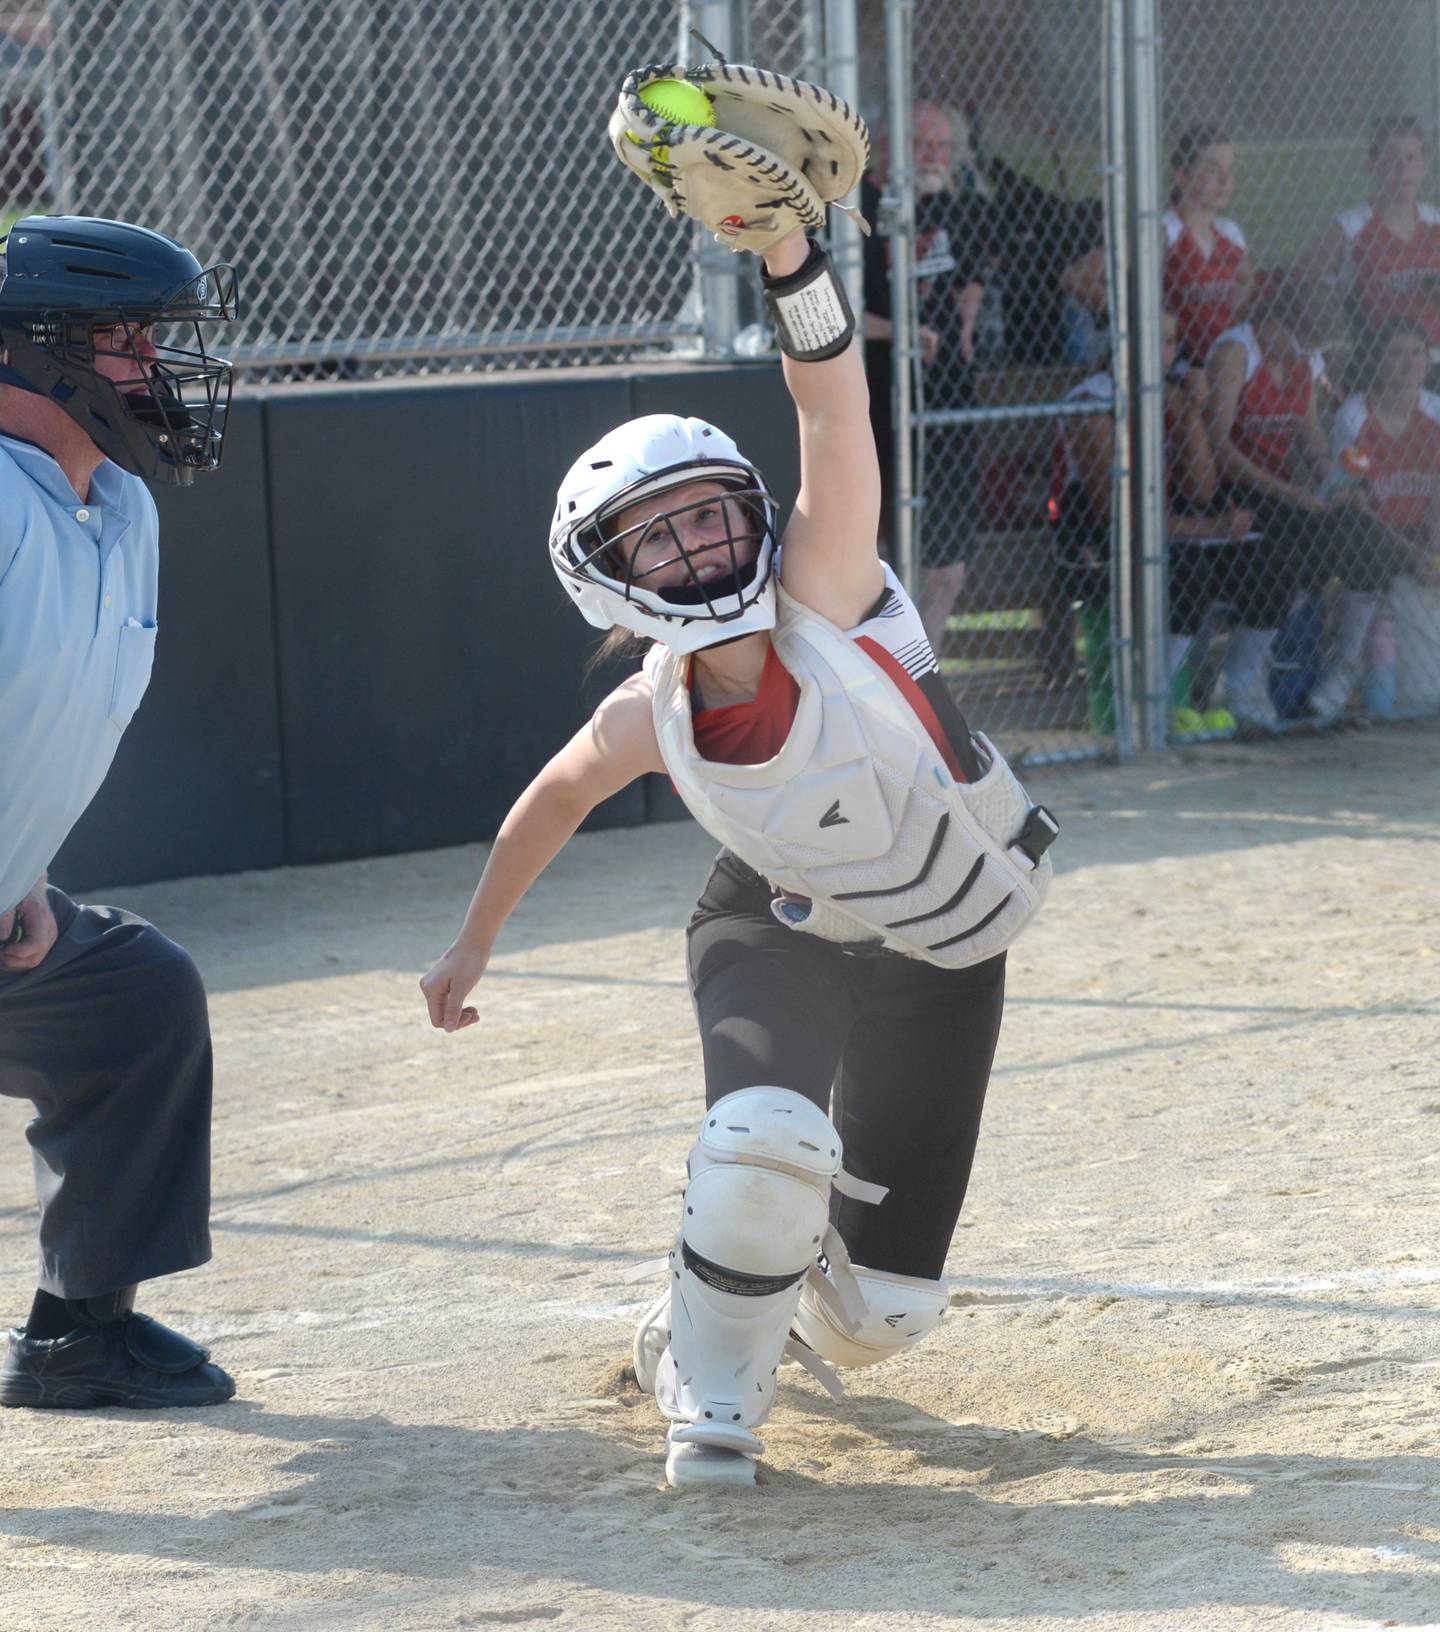 Forreston catcher Hailey Greenfield catches a high pitch during Tuesday's game against Orangeville at the 1A Forreston Sectional. The Cardinals lost the game 9-1.